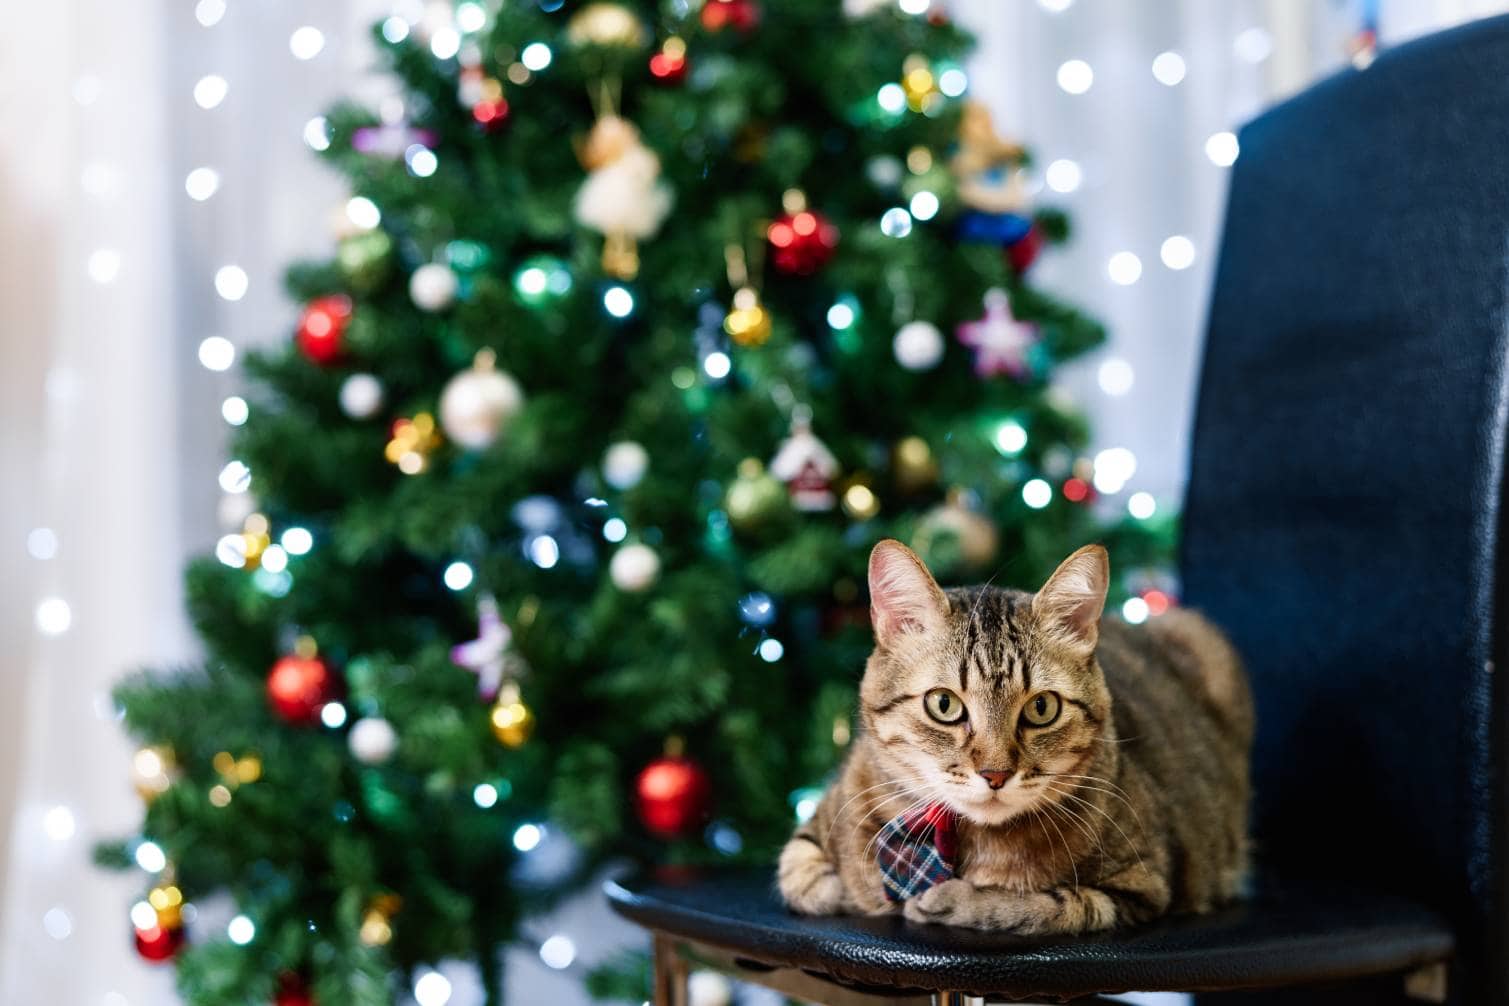 Are Christmas trees safe around cats